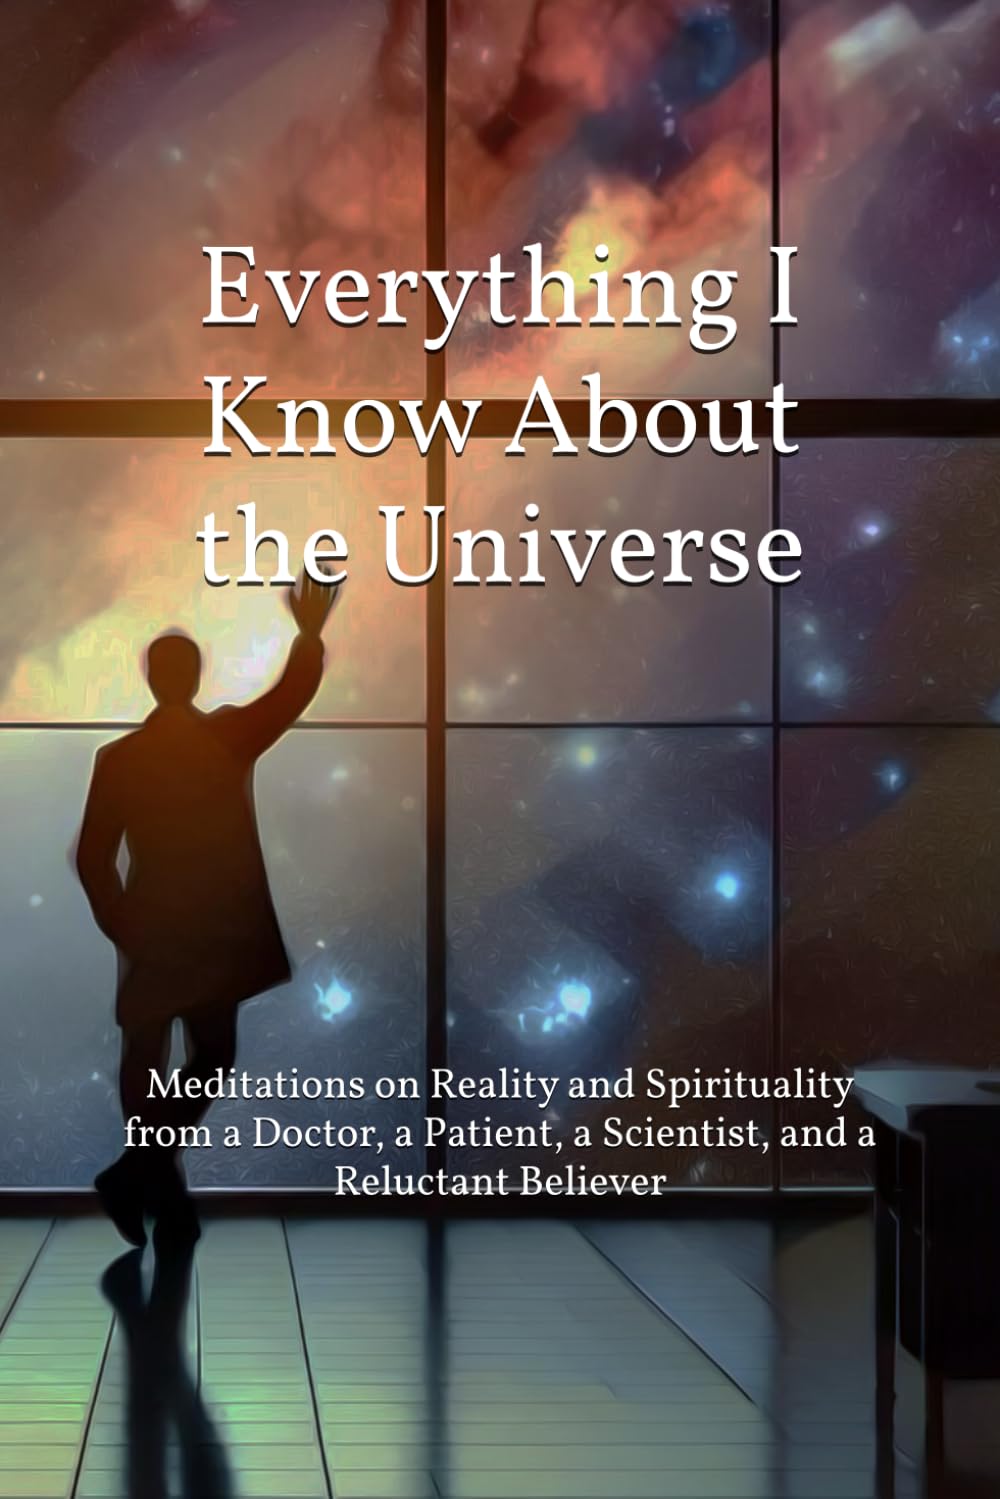 New book "Everything I Know About the Universe" by Anonymous is released, a powerful reframing of science and spirituality that seeks to resolve fundamental questions about existence